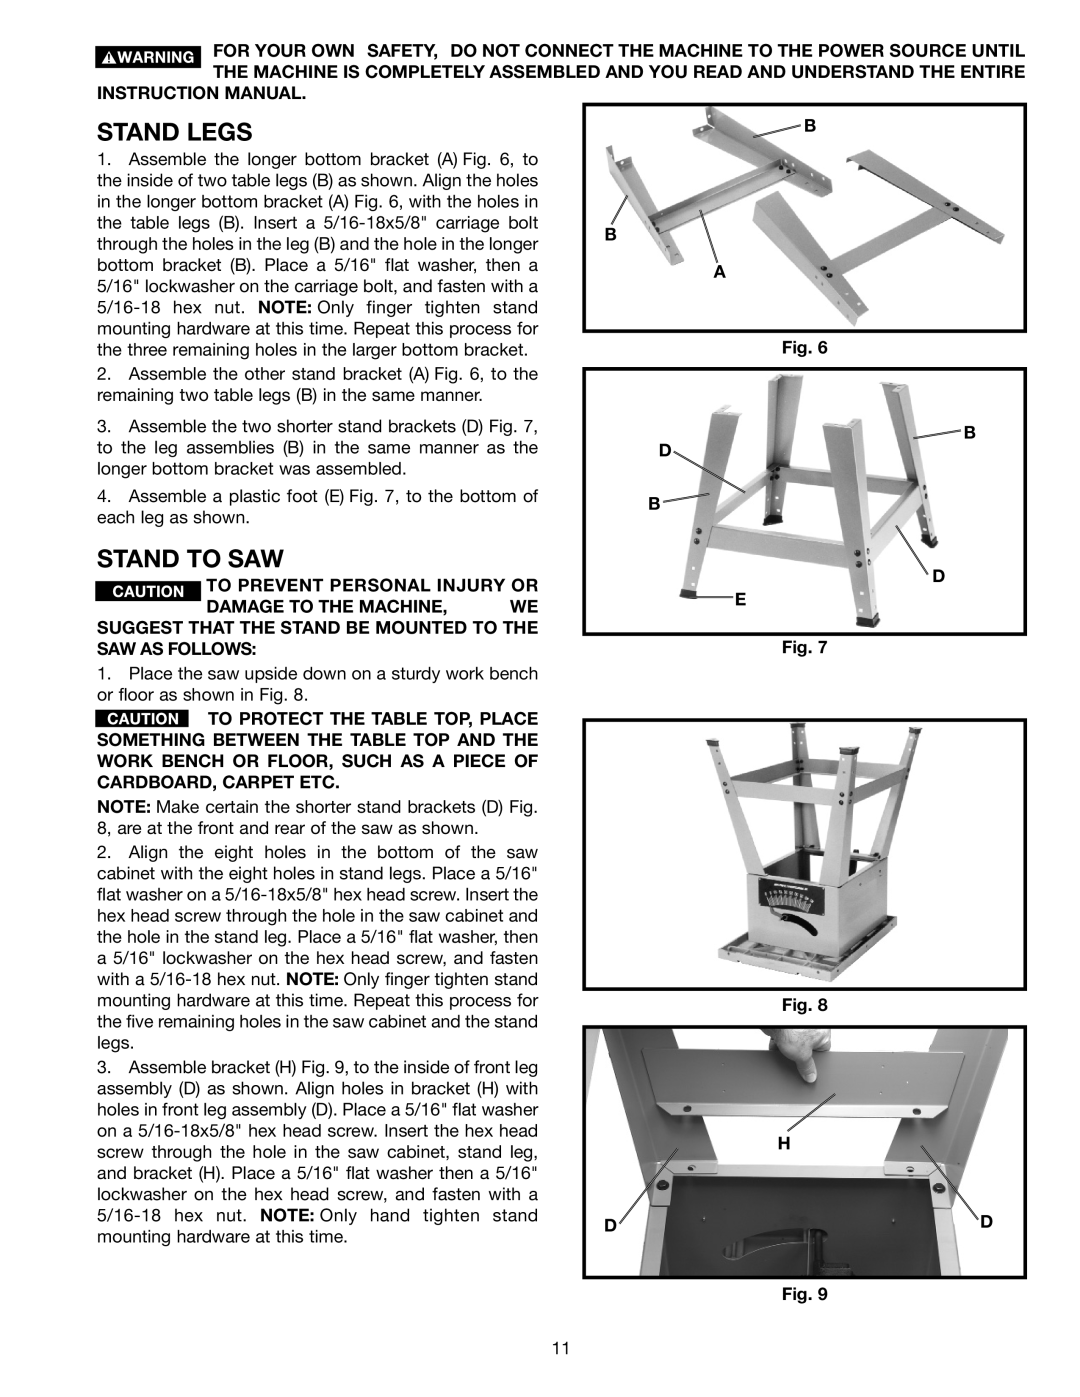 Porter-Cable 36-679 Stand Legs, Stand To Saw, Instruction Manual, To Prevent Personal Injury Or, B B A, B D B D E, H Dd 